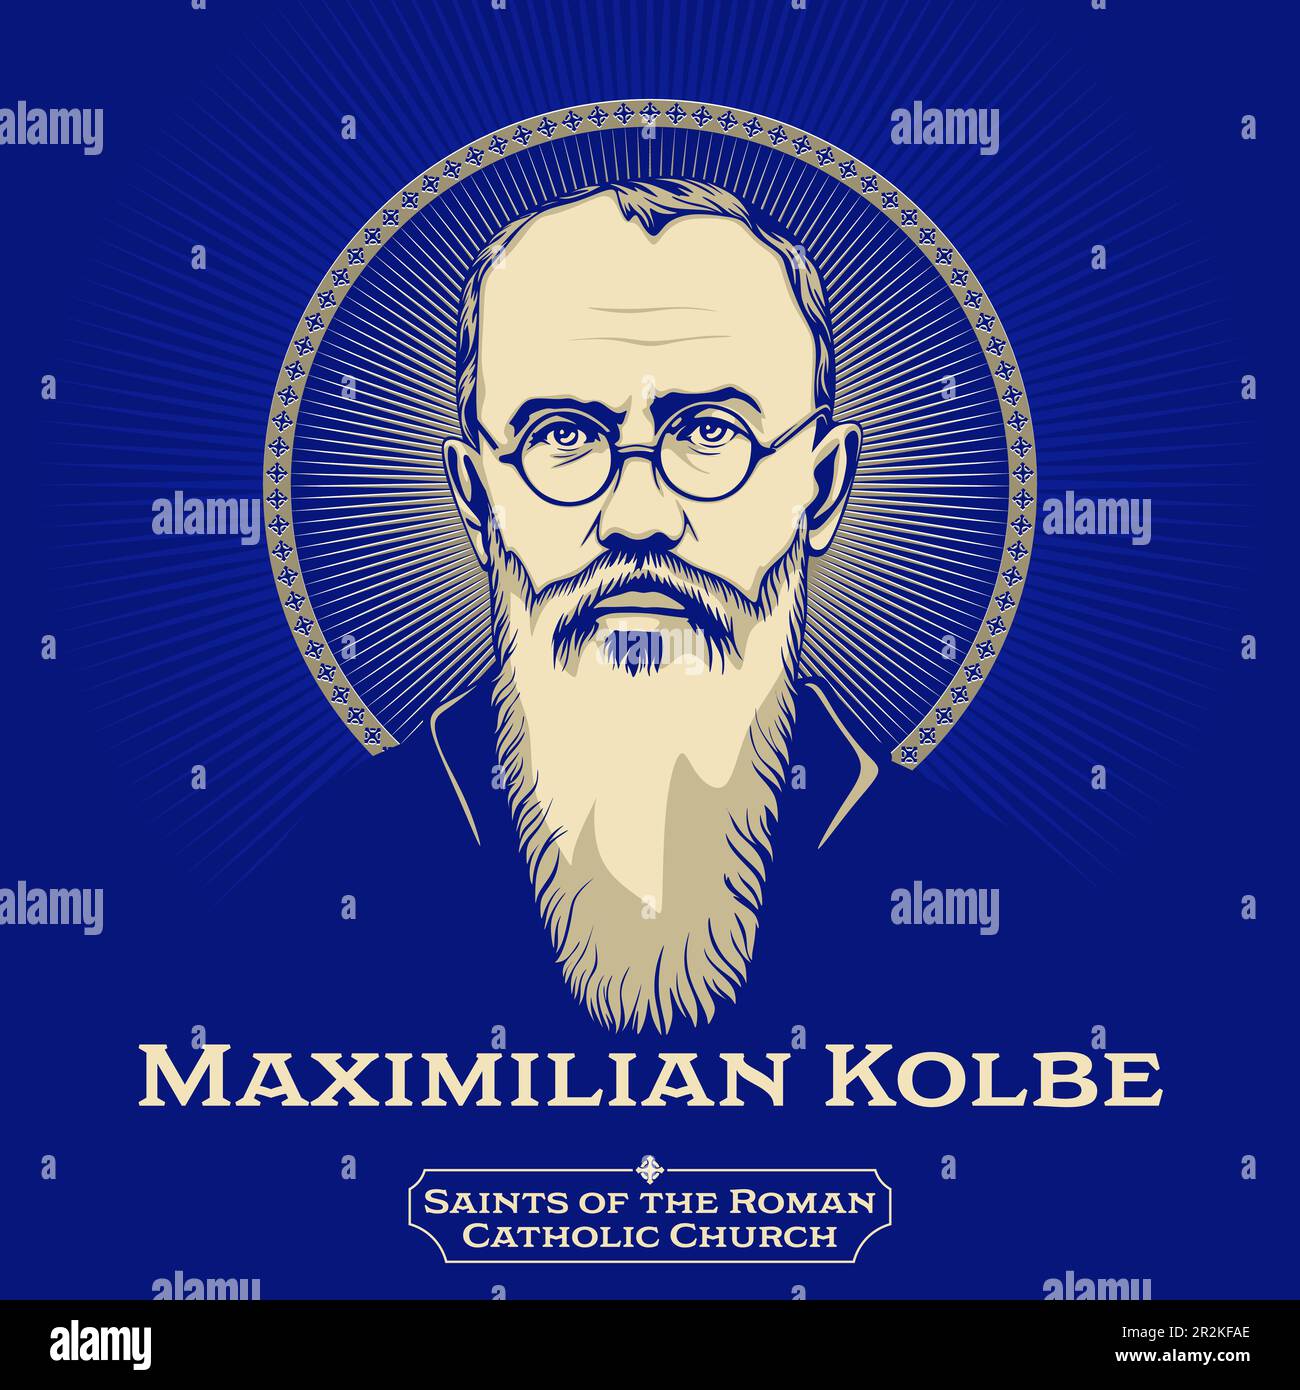 Maximilian Kolbe (1894-1941) was a Polish Catholic priest and Conventual Franciscan friar who volunteered to die in place of a man in the German death Stock Vector